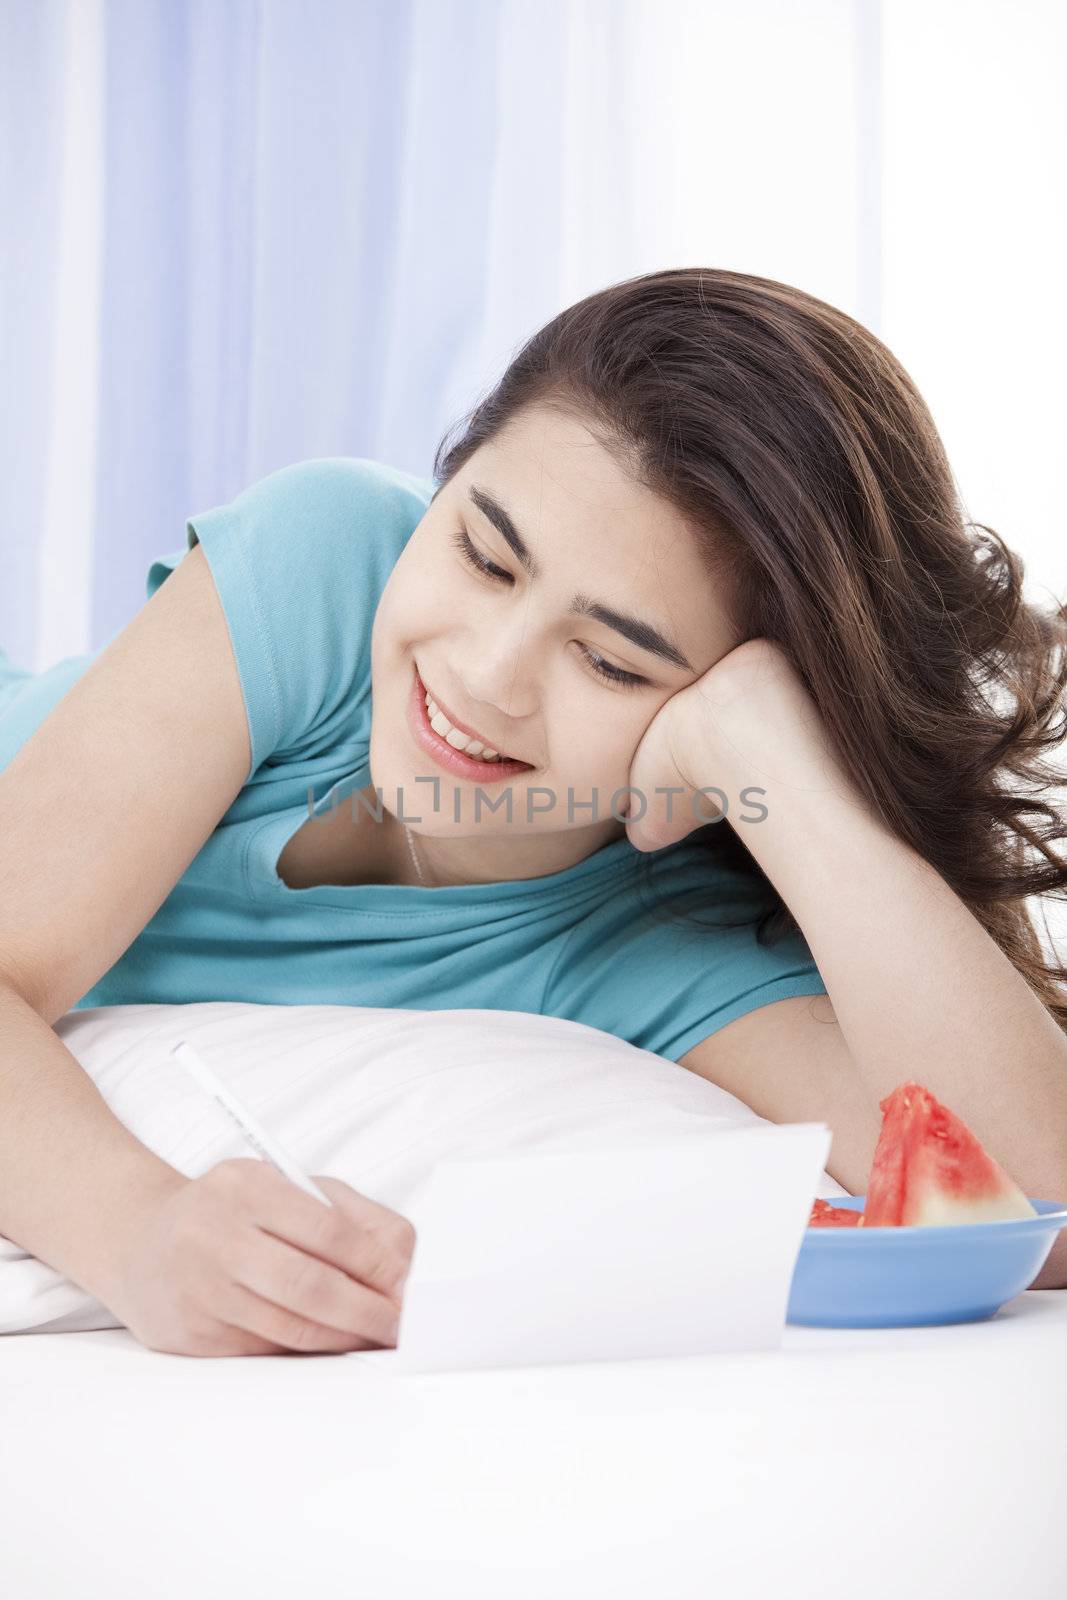 Teen girl lying on floor writing a letter or note by jarenwicklund